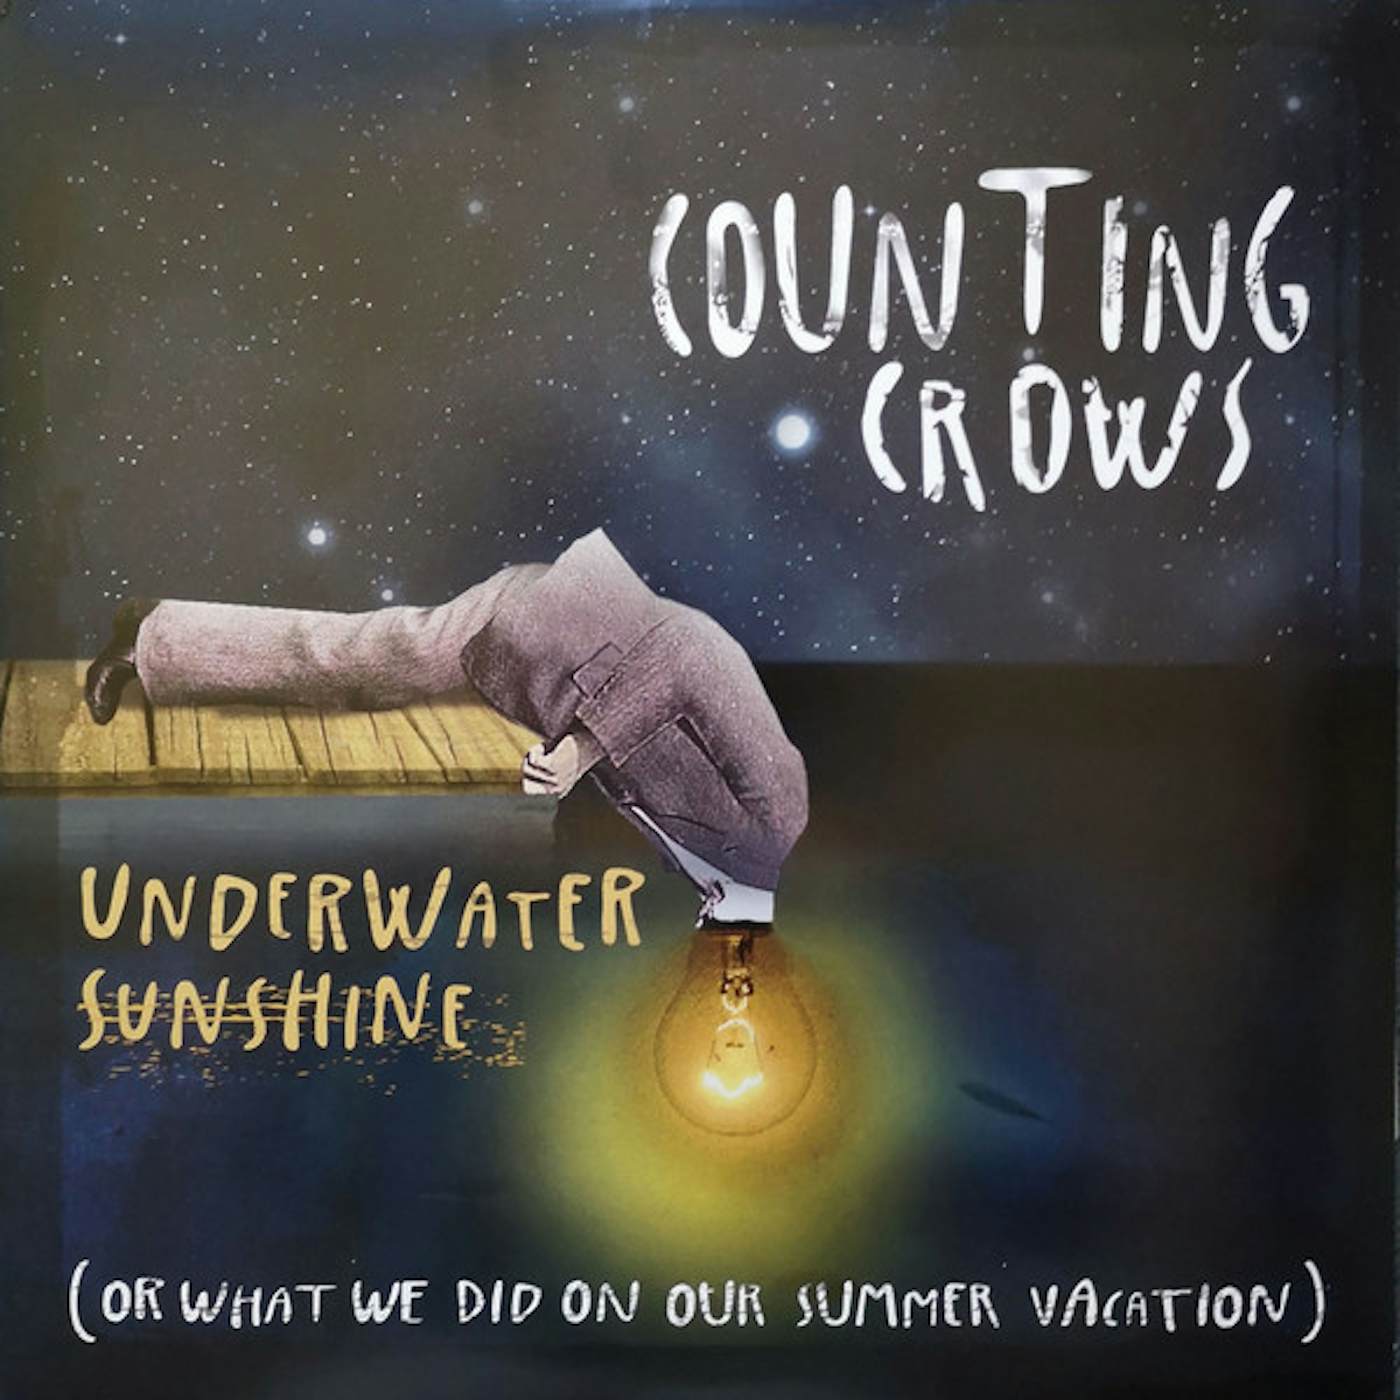 Counting Crows Underwater Sunshine (Or What We Did On Our Summer Vacation) Vinyl Record